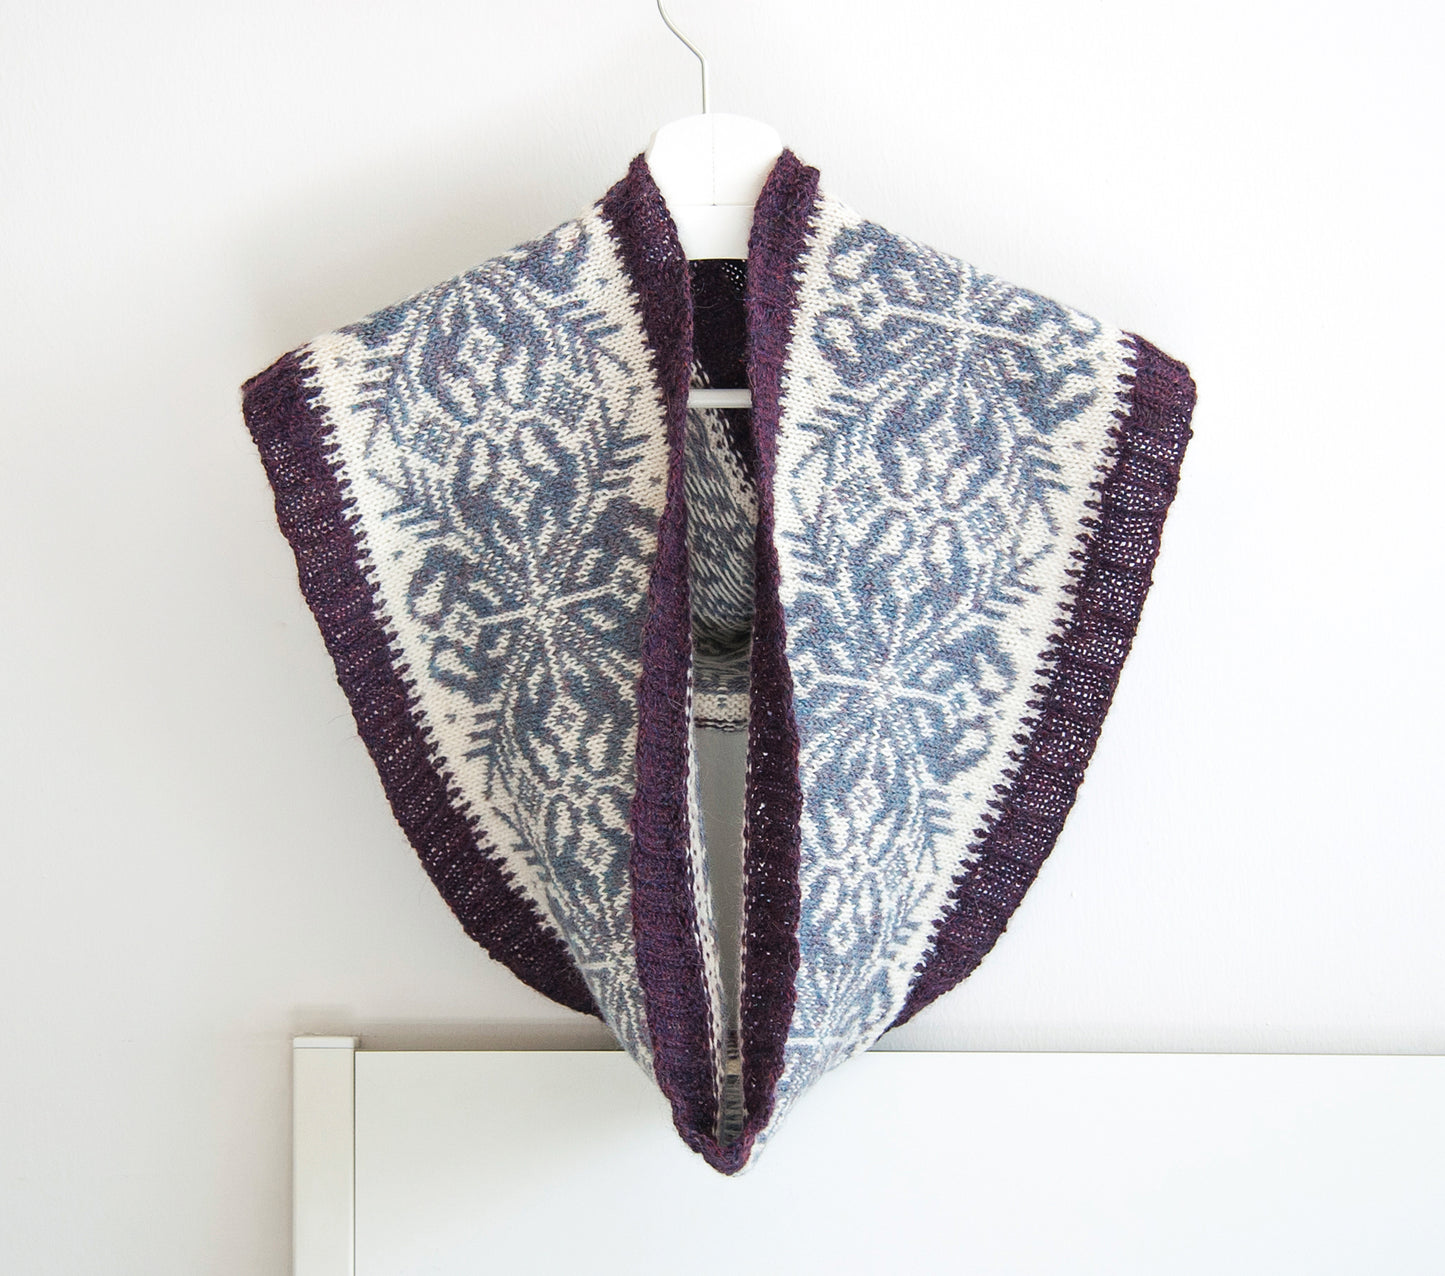 SNOWFLAKES Hand-Knitted Alpaca Cowl